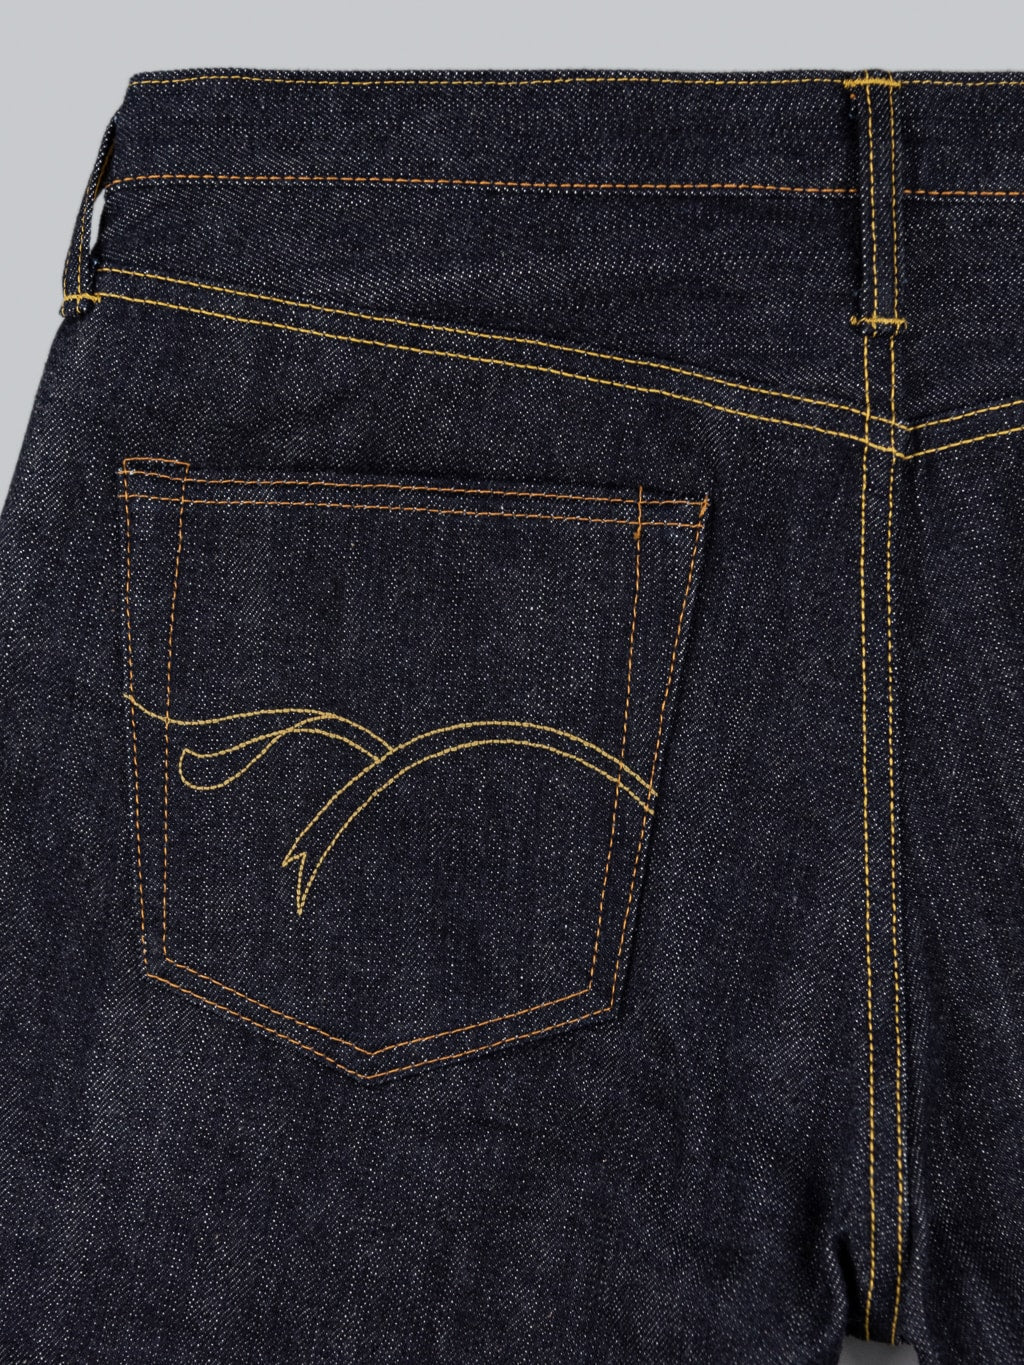 The Flat Head 3002 14.5oz Slim Tapered selvedge Jeans pocket stitching